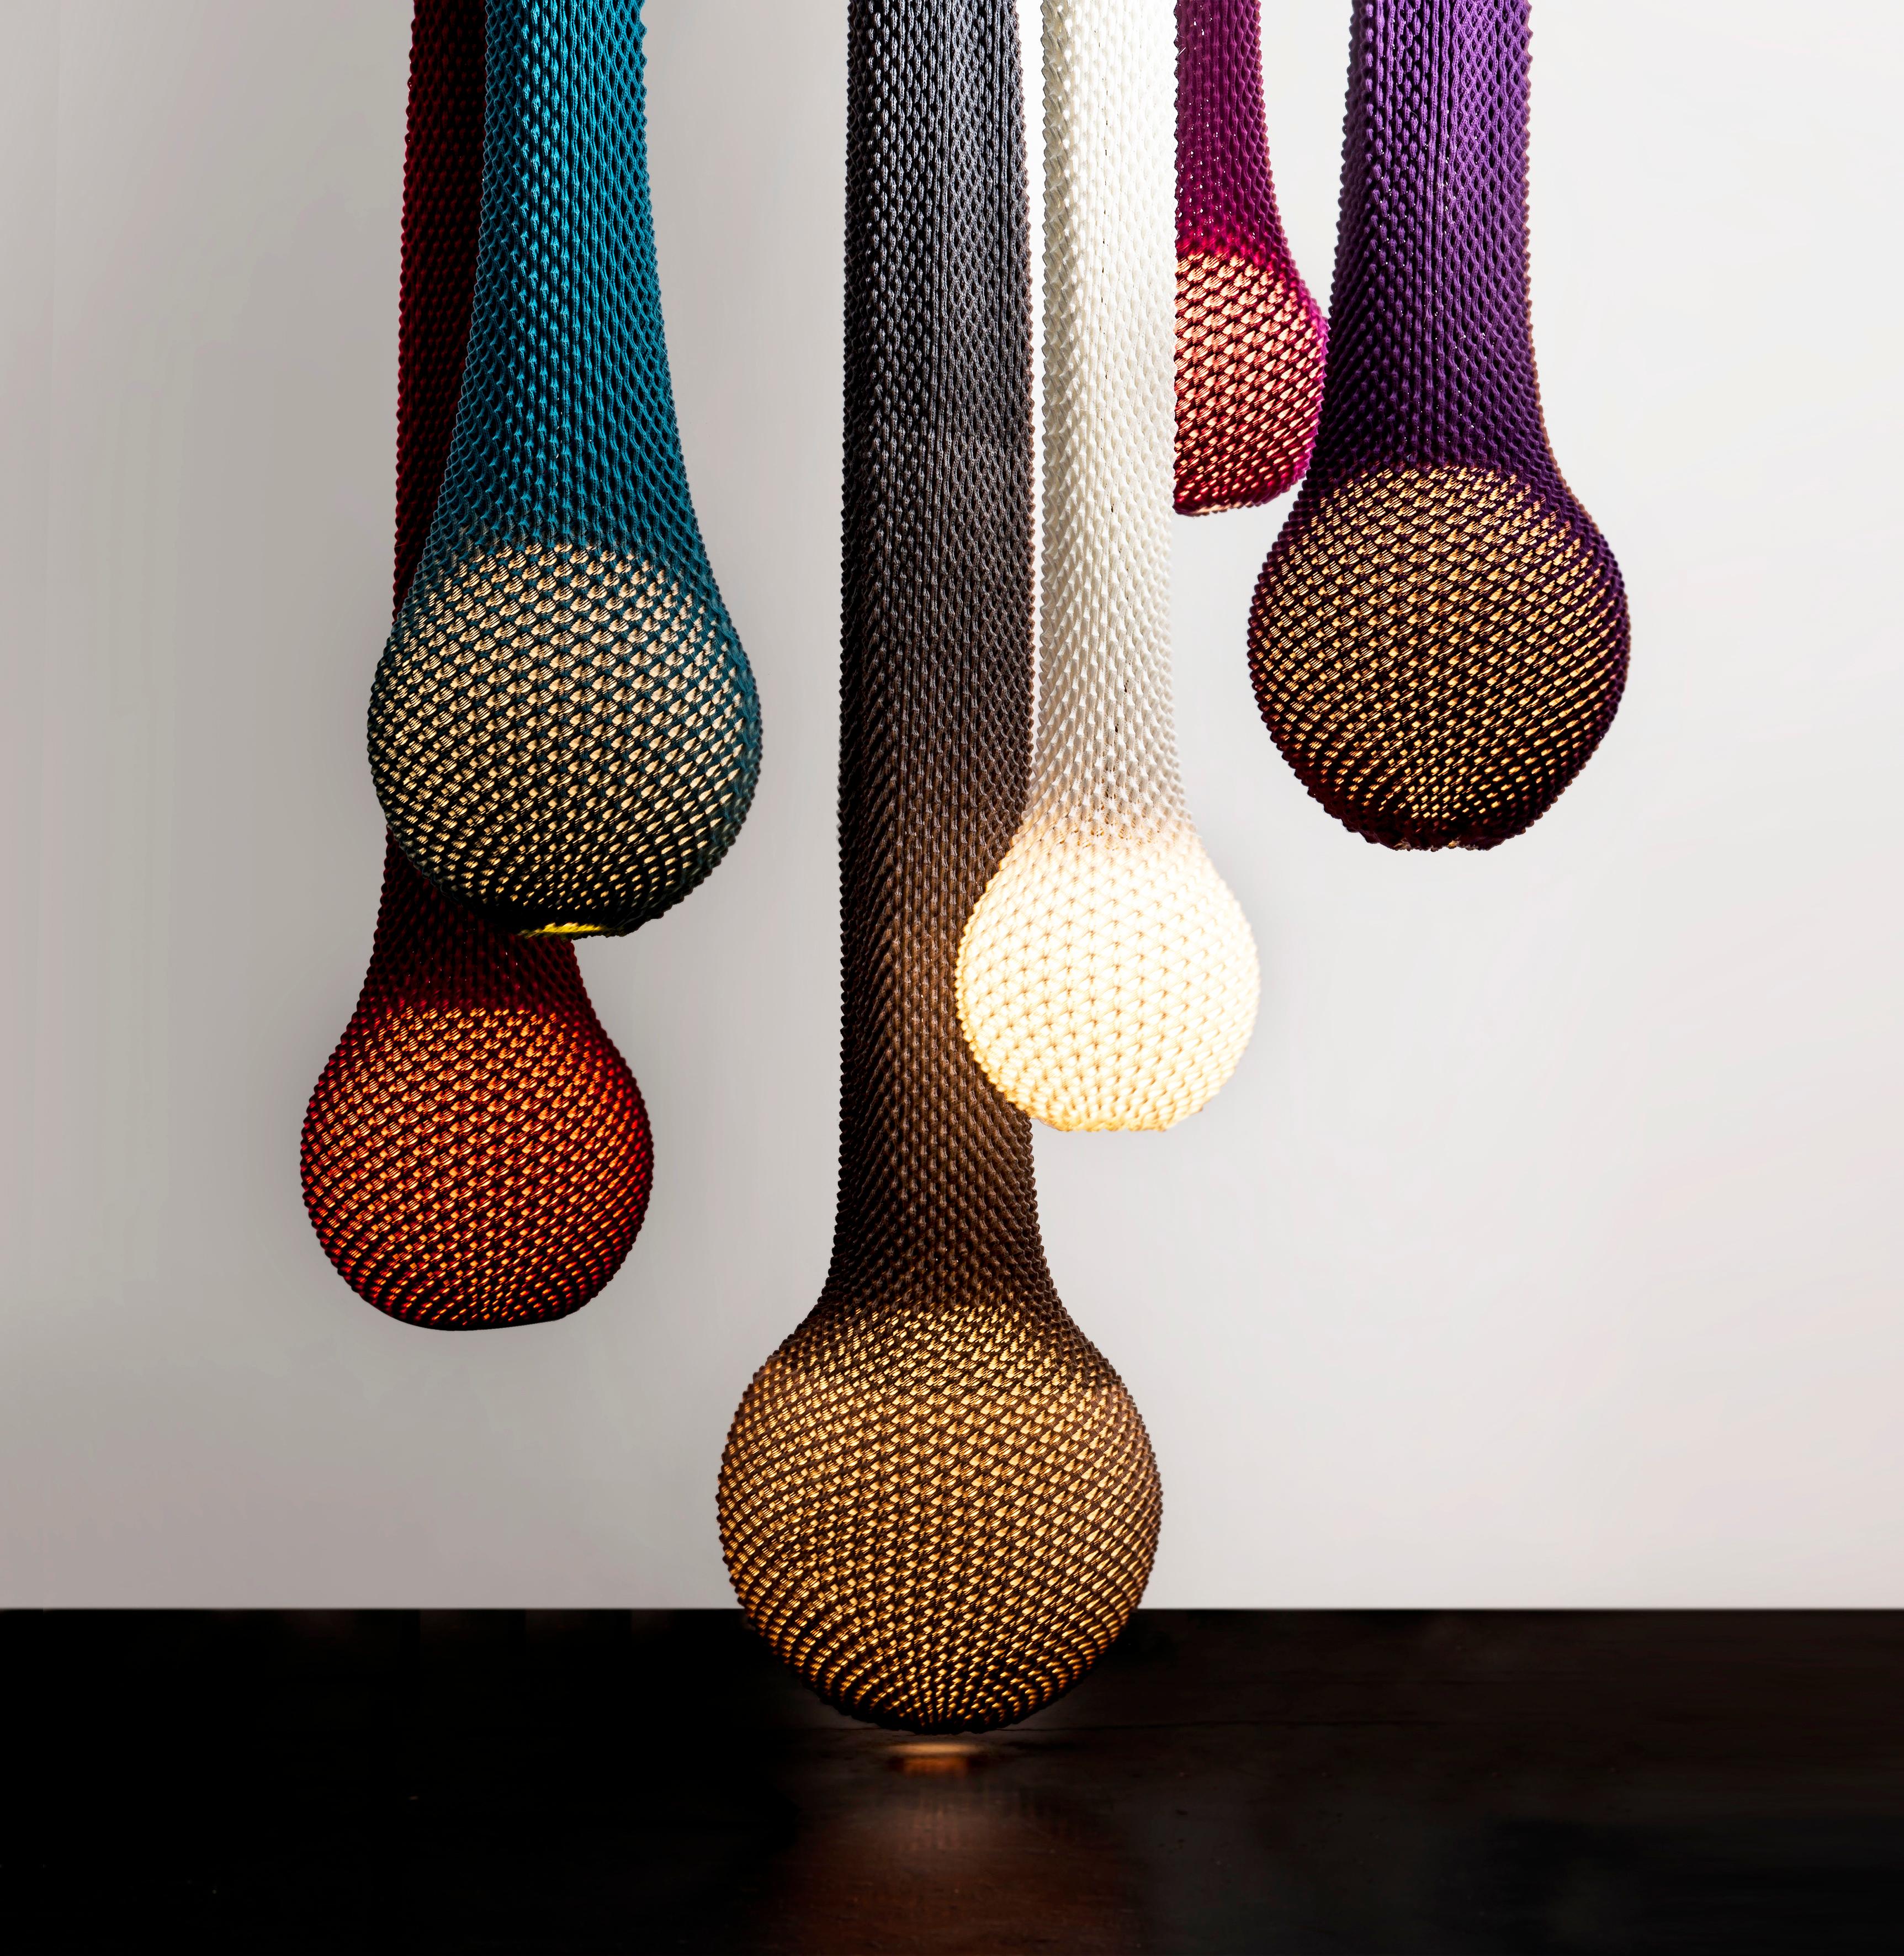 The Knitted lighting is an award-winning collection 
series of lightings that combines technology with tradition.
Knitting acrylic threads in fixed patterns with wool crochet, creates a three-dimensional sheet of fabric which serves as a lighting